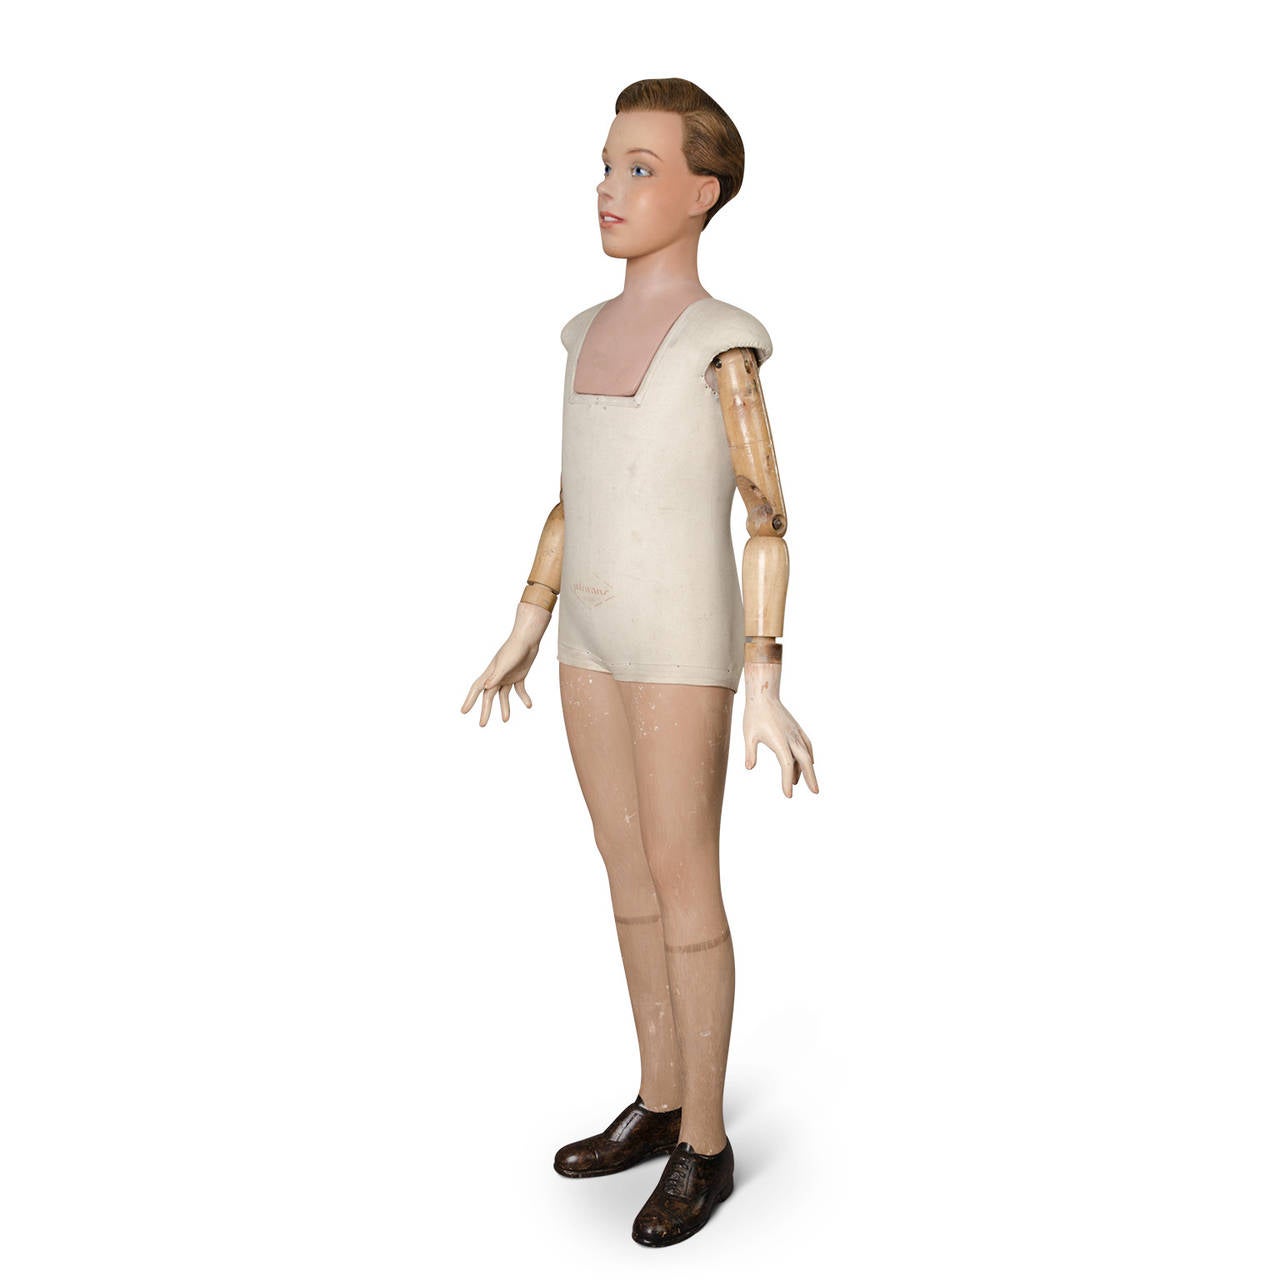 Child model mannequin signed Pierre Imans, Paris. Plaster head, legs and hands. Wood articulated arms. Natural implanted hairs. Glass eyes.